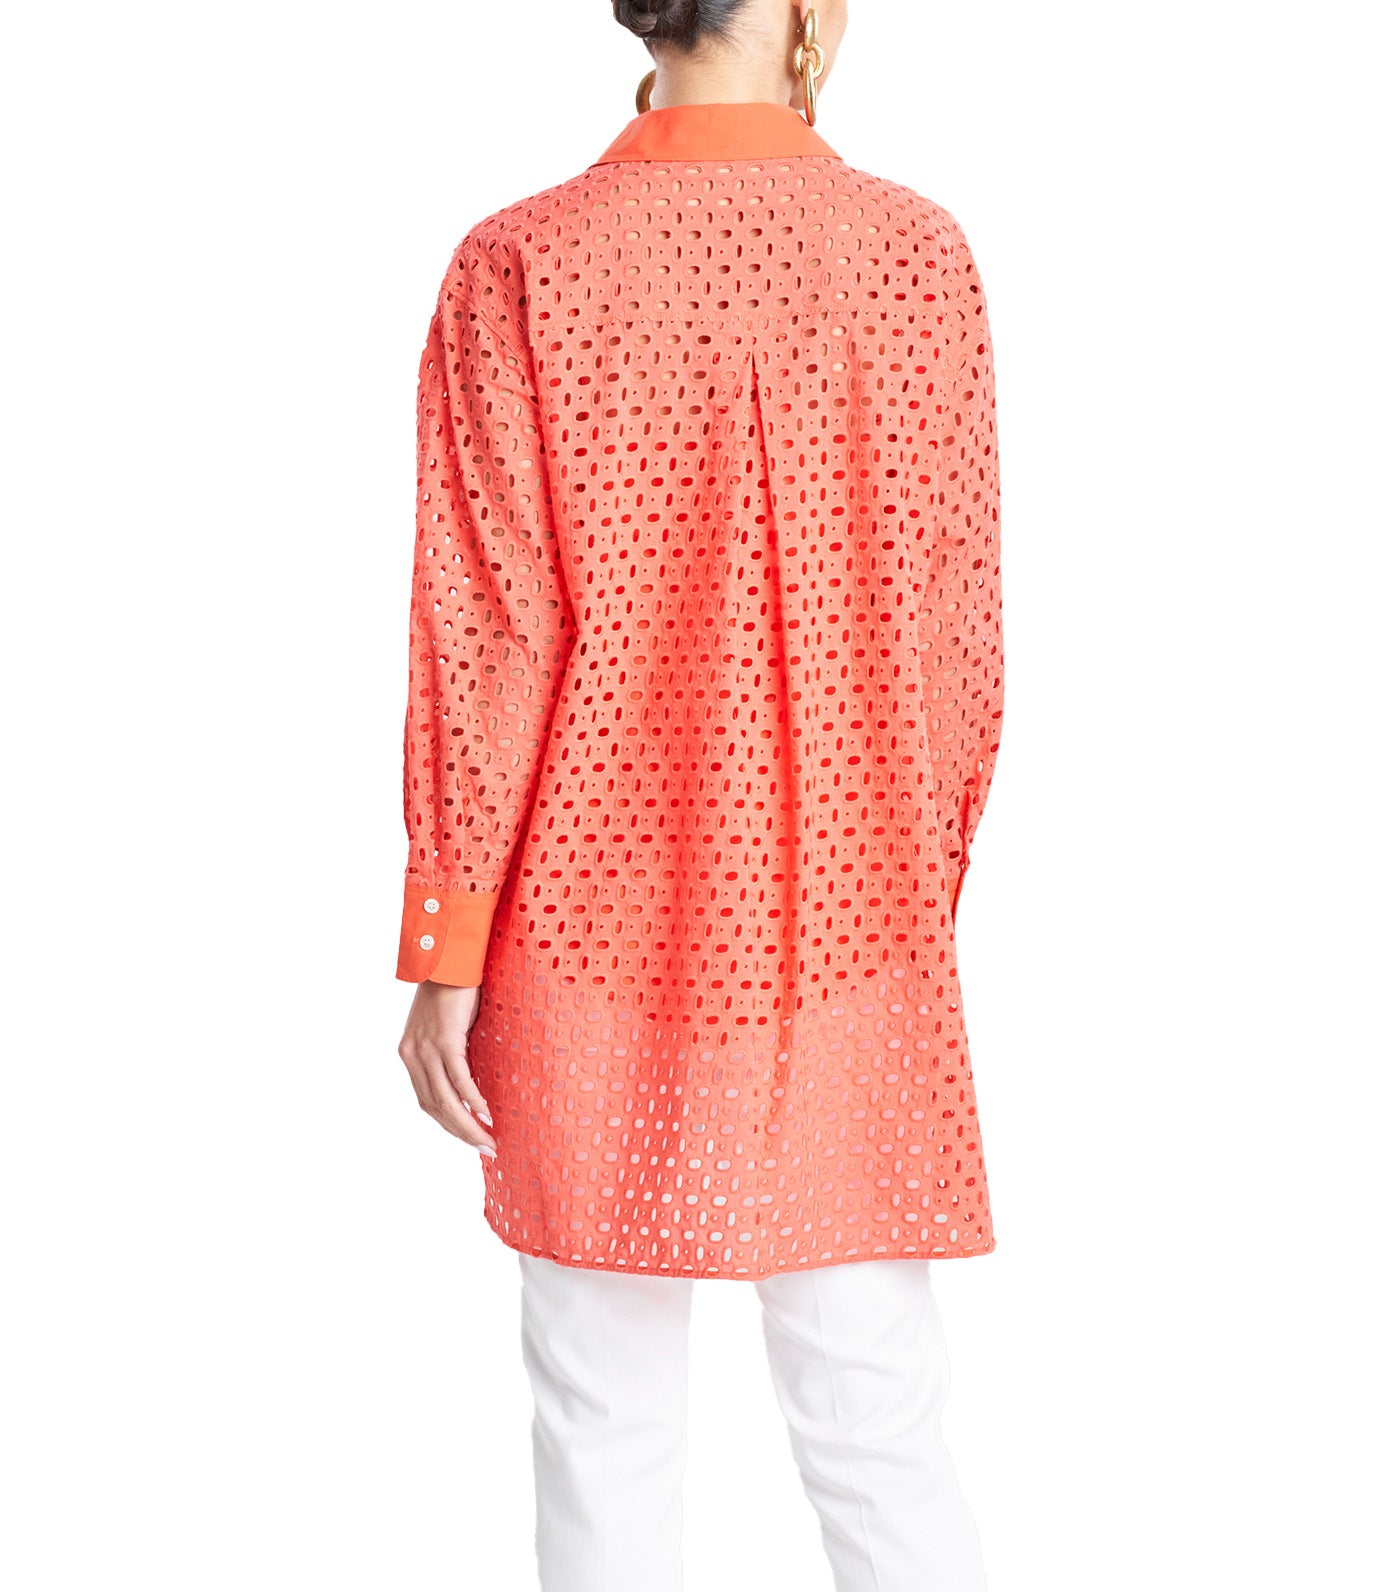 Cotton Eyelet Oversized Top Bright Heather Coral